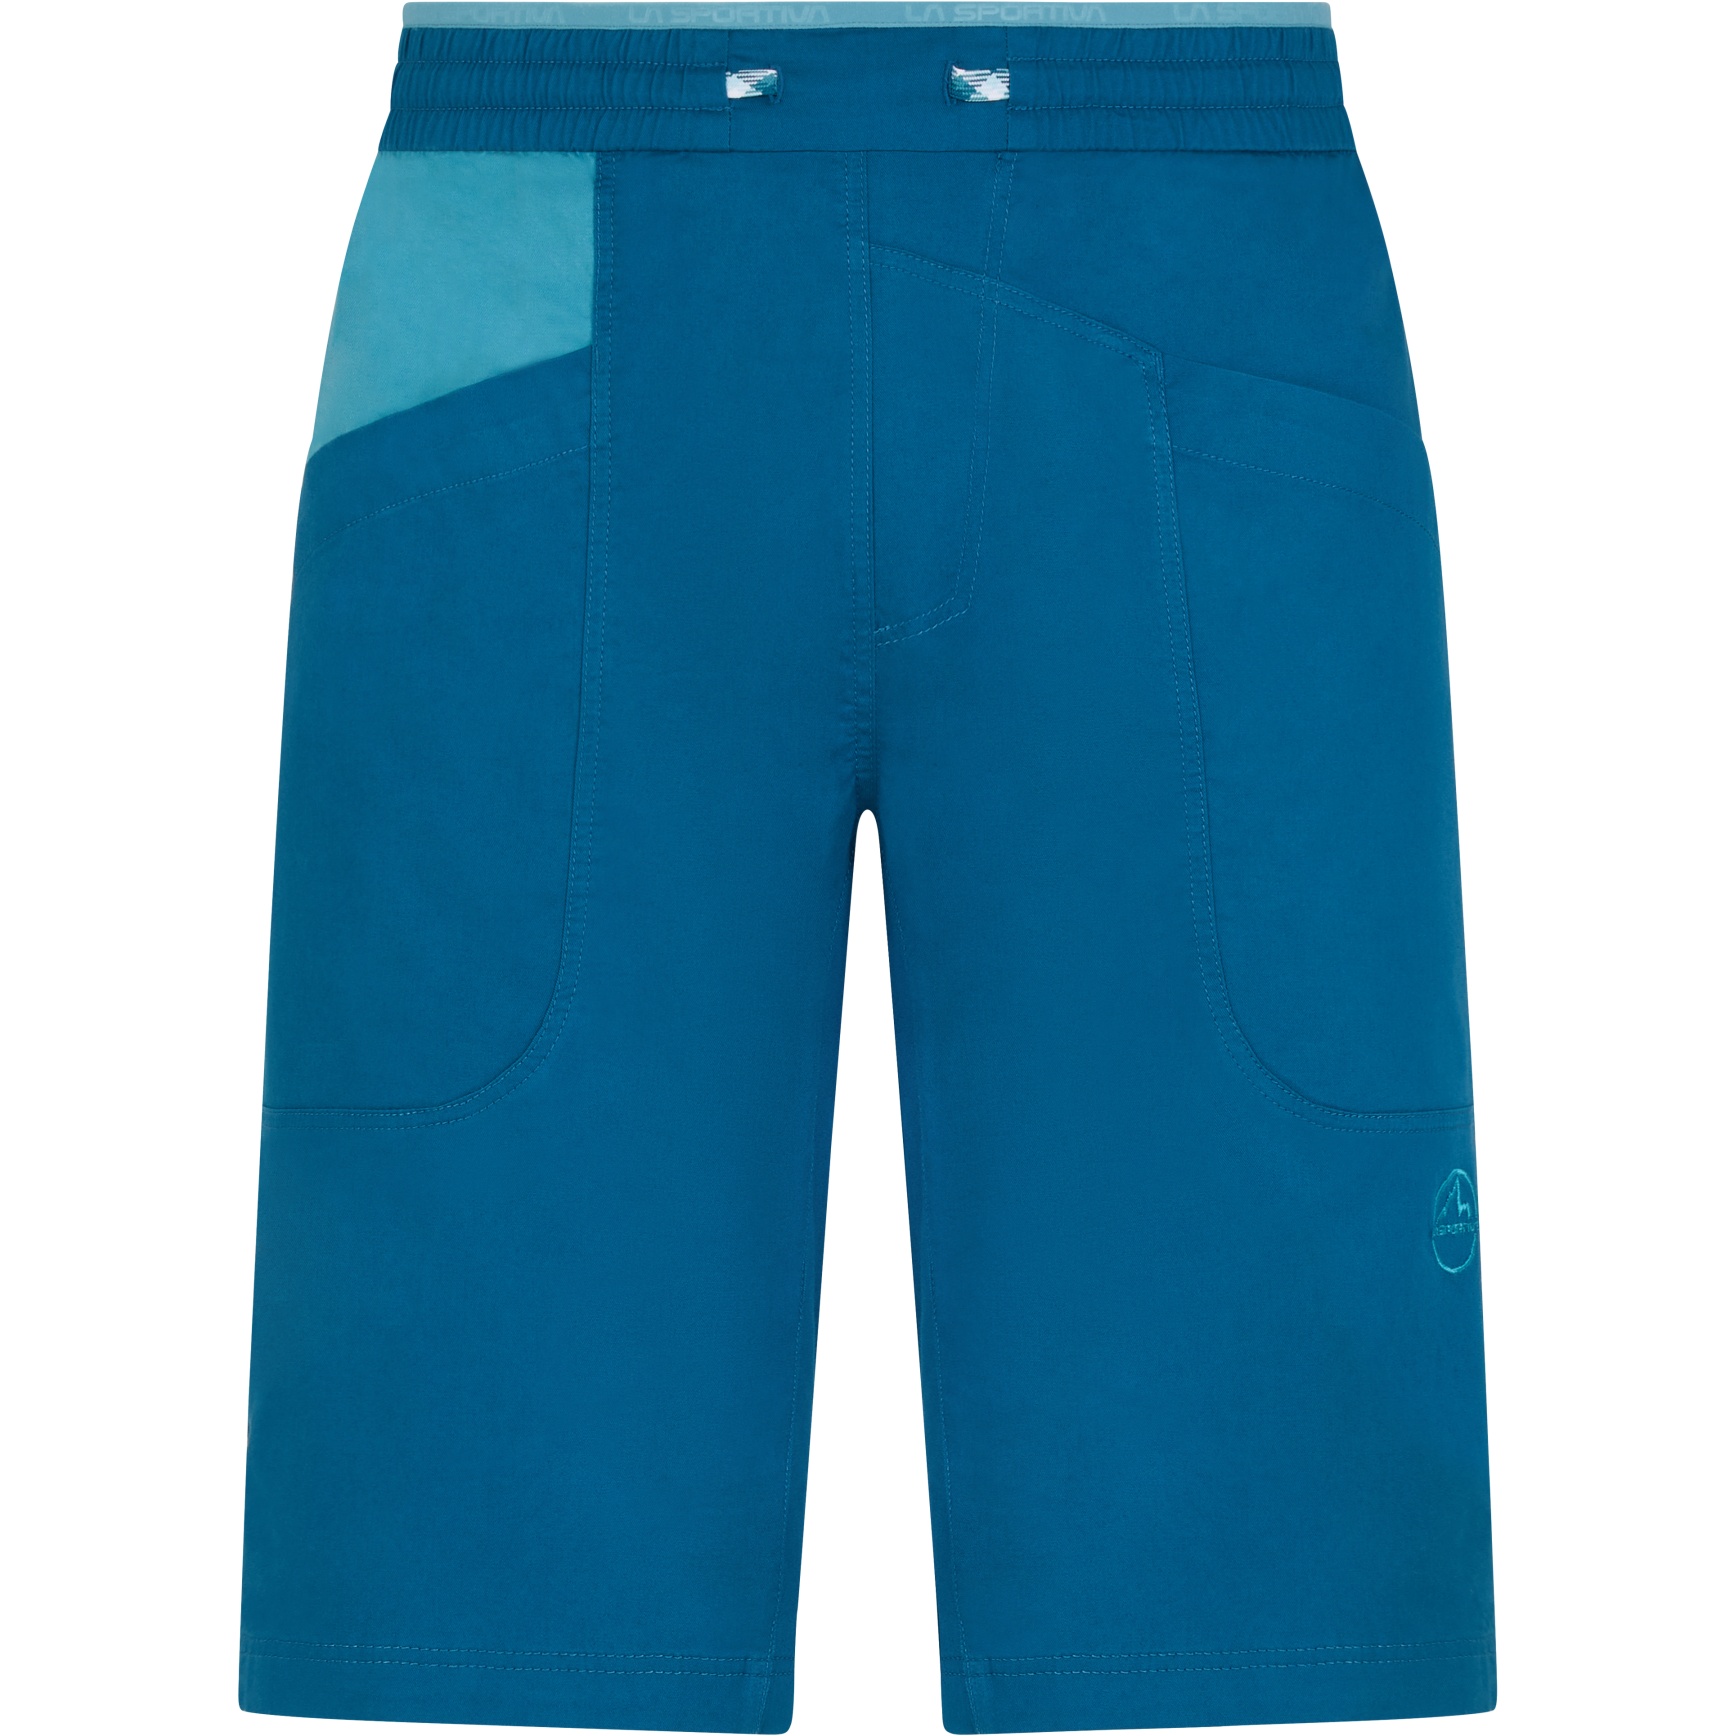 Picture of La Sportiva Bleauser Shorts - Space Blue/Topaz